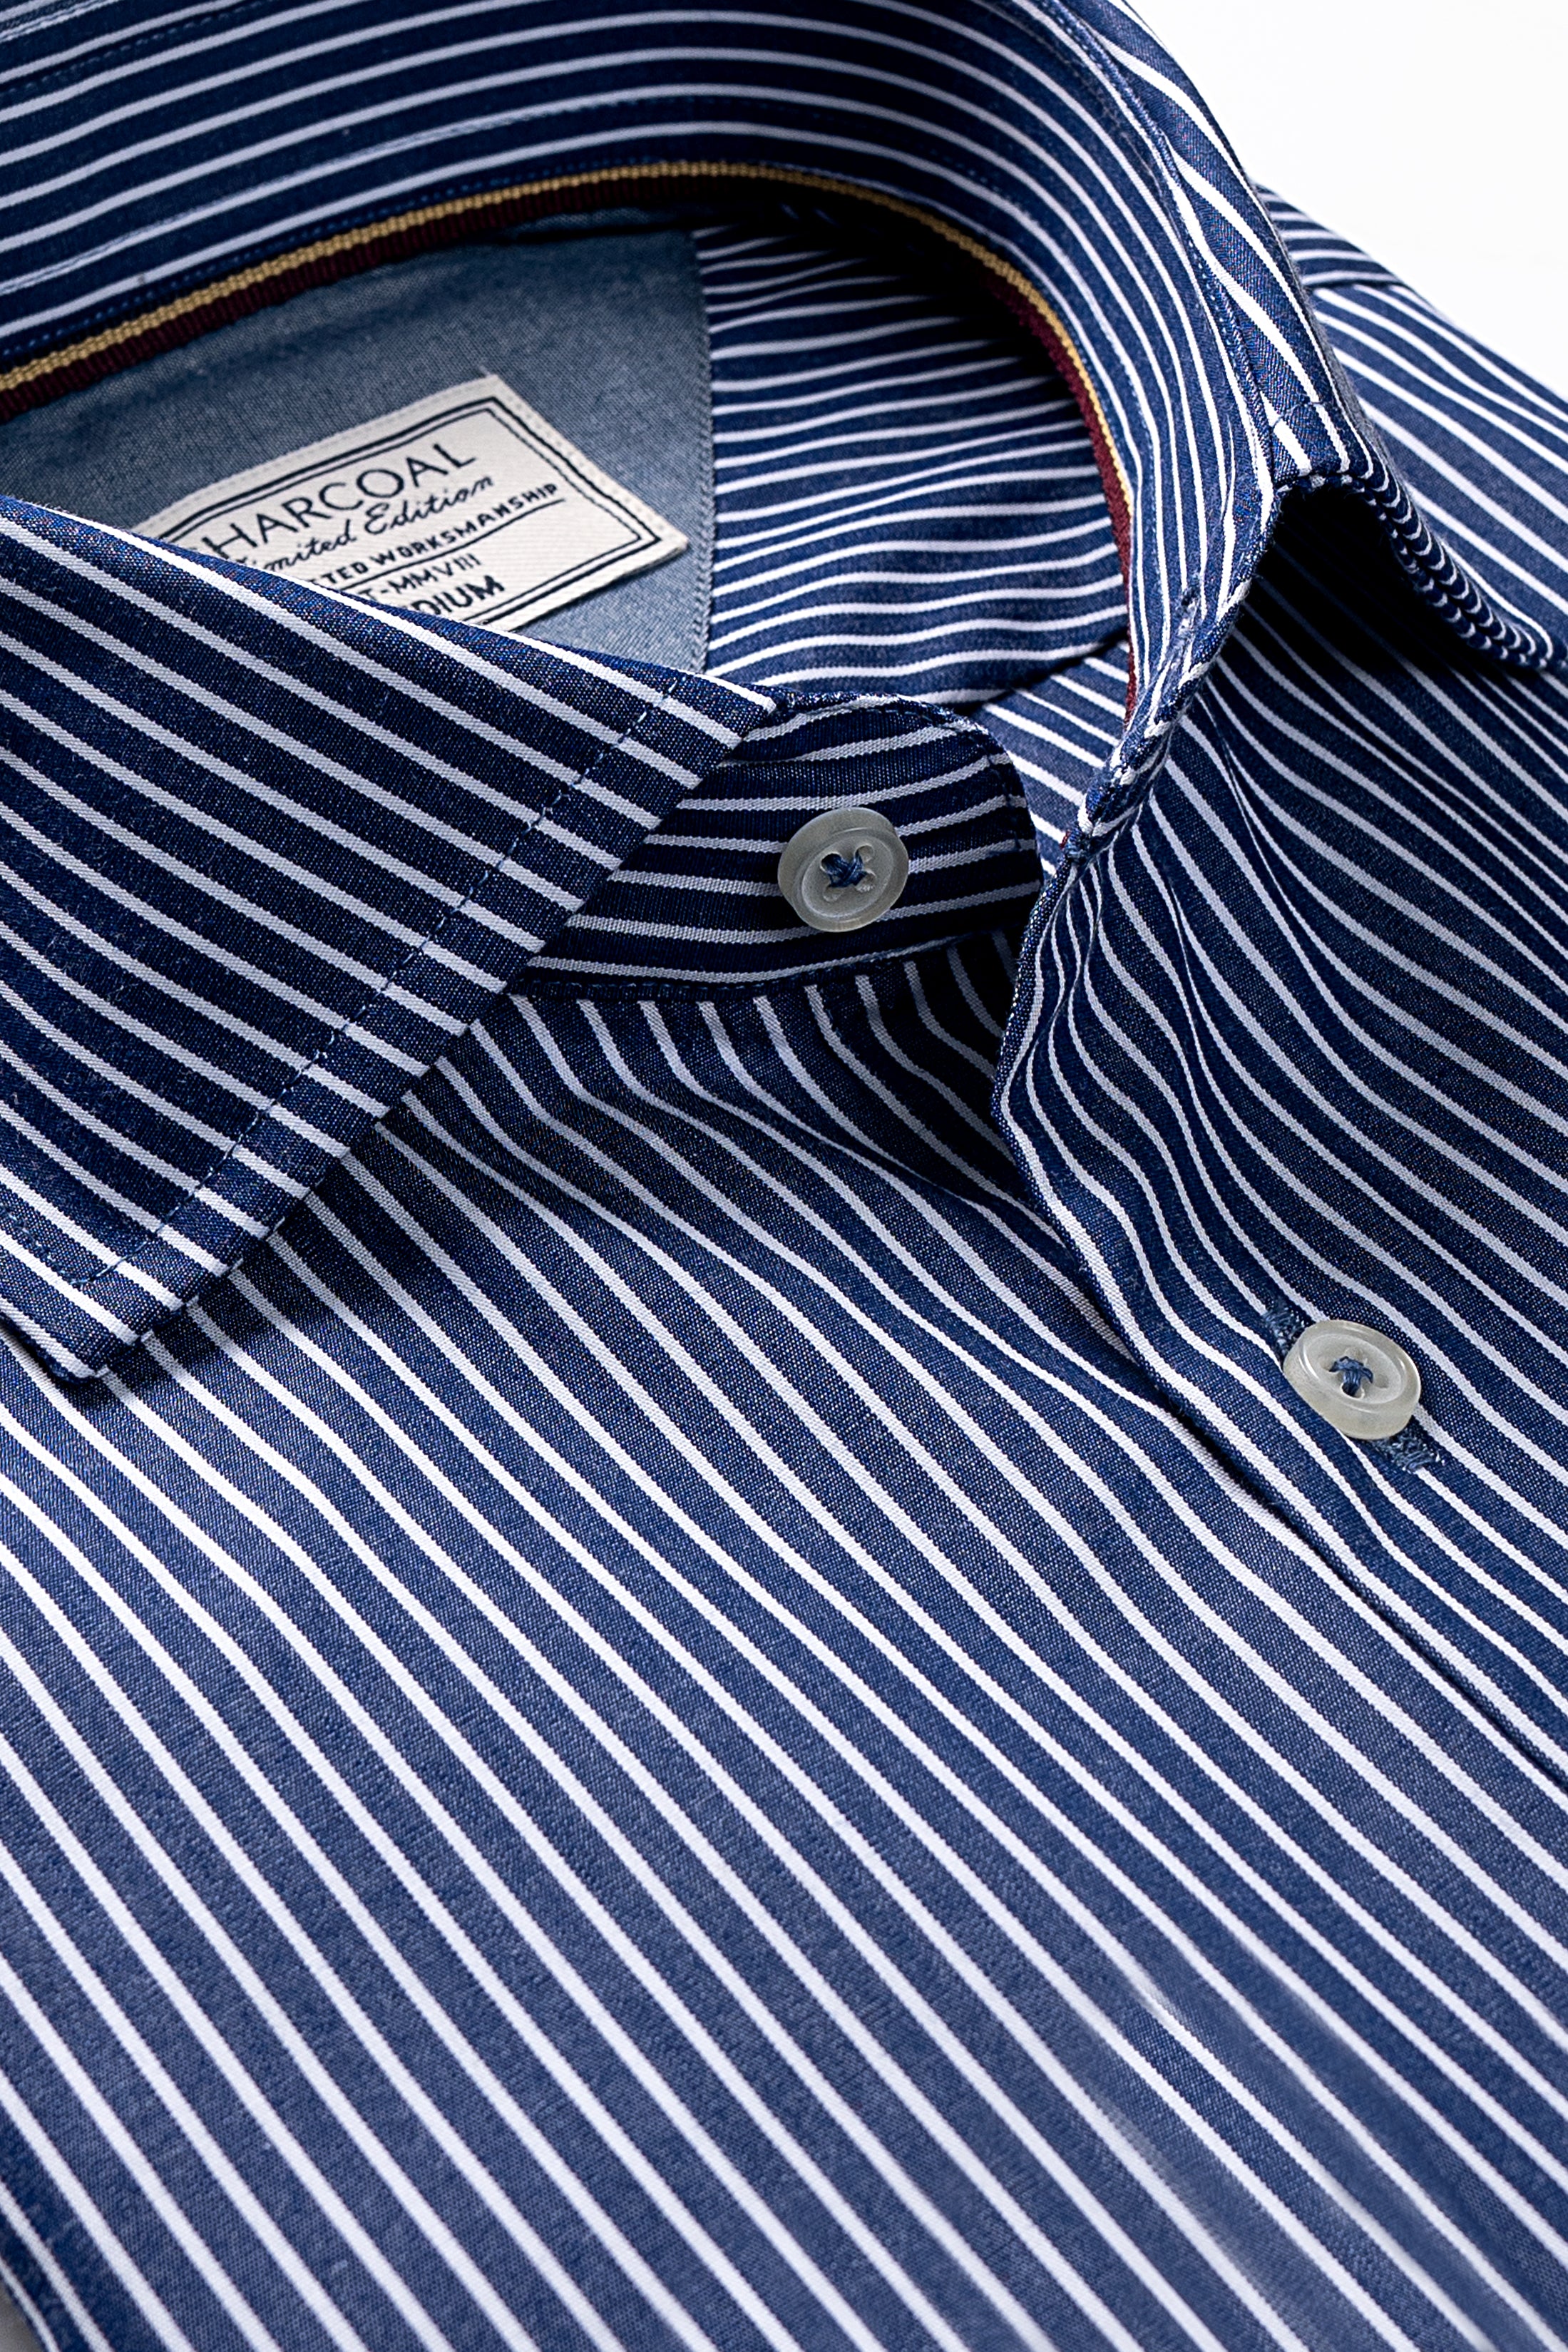 LIMITED EDITION SHIRTS NAVY WHITE STRIPES